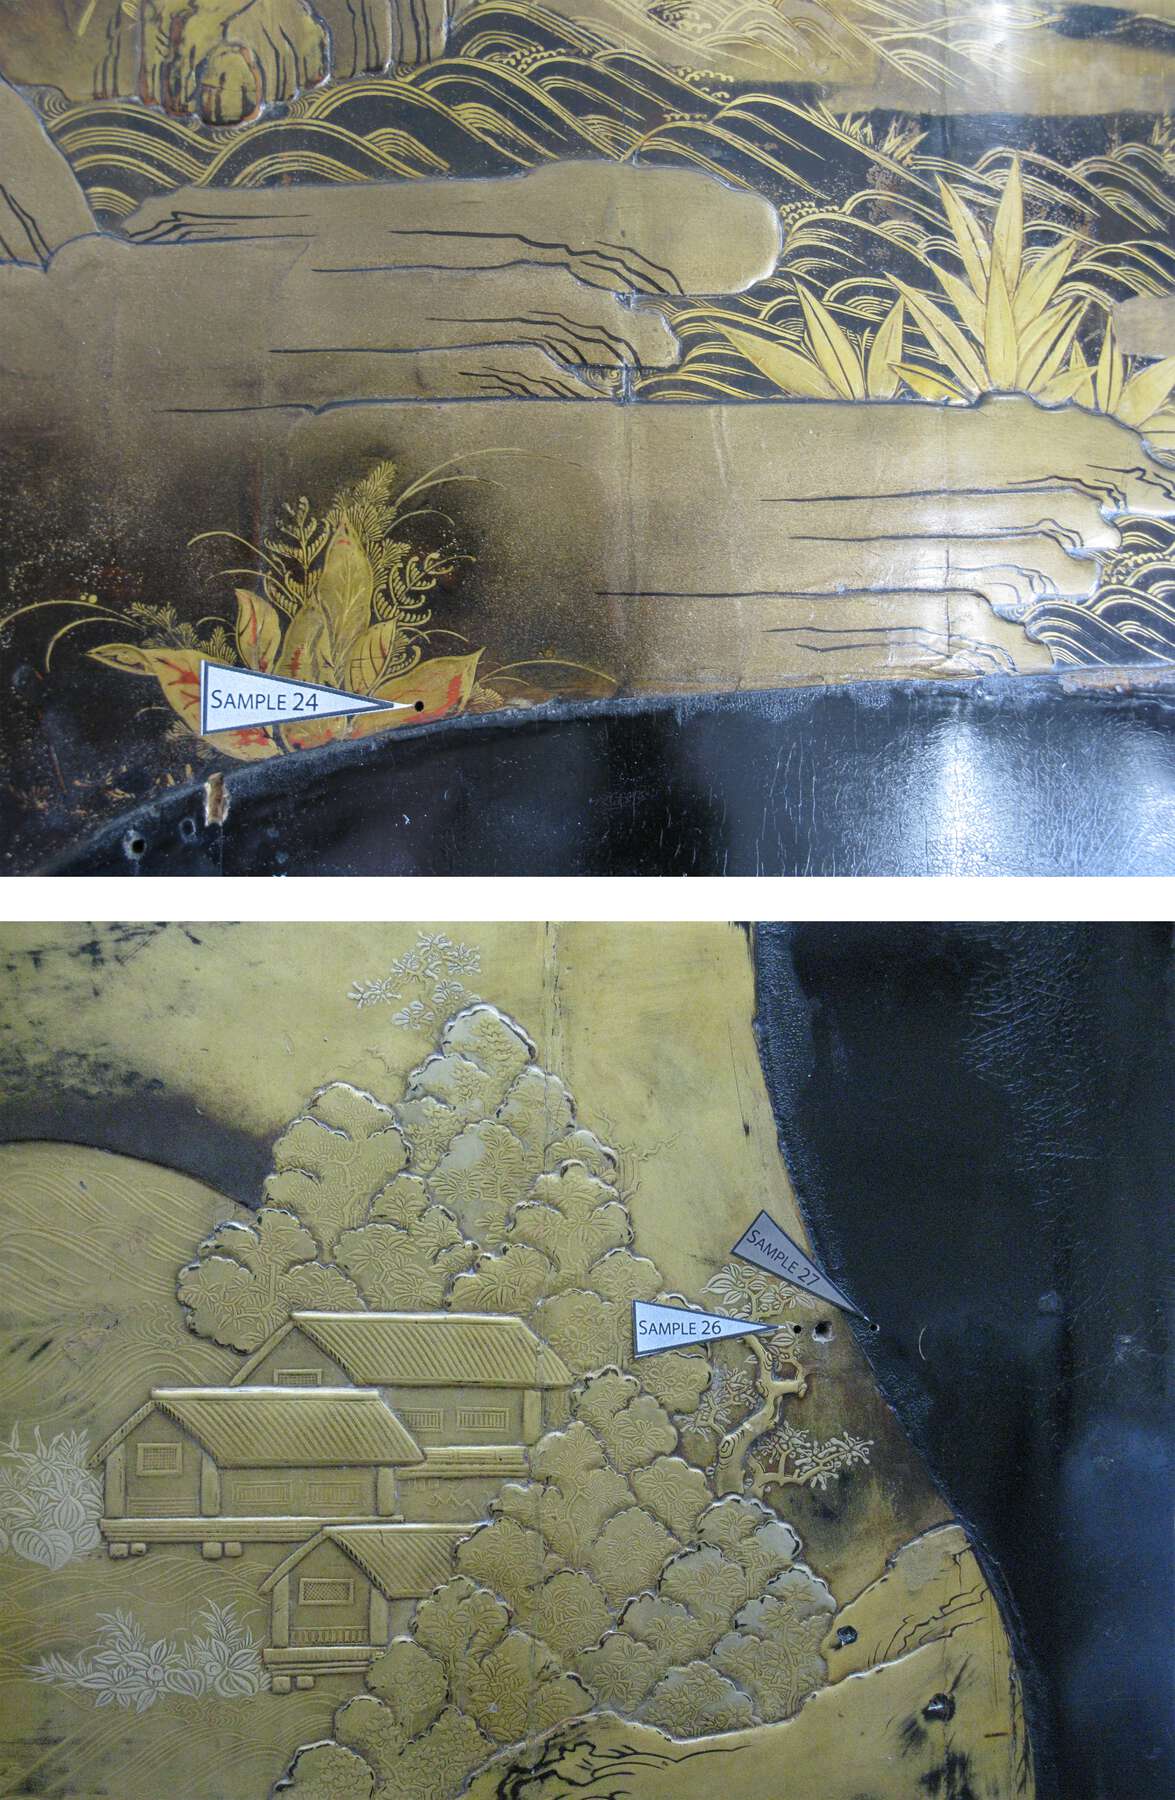 details of the lacquer panels featuring white triangles labeled with sample numbers that indicate the location of the ground samples shown in the photomicrographs on the cabinets themselves